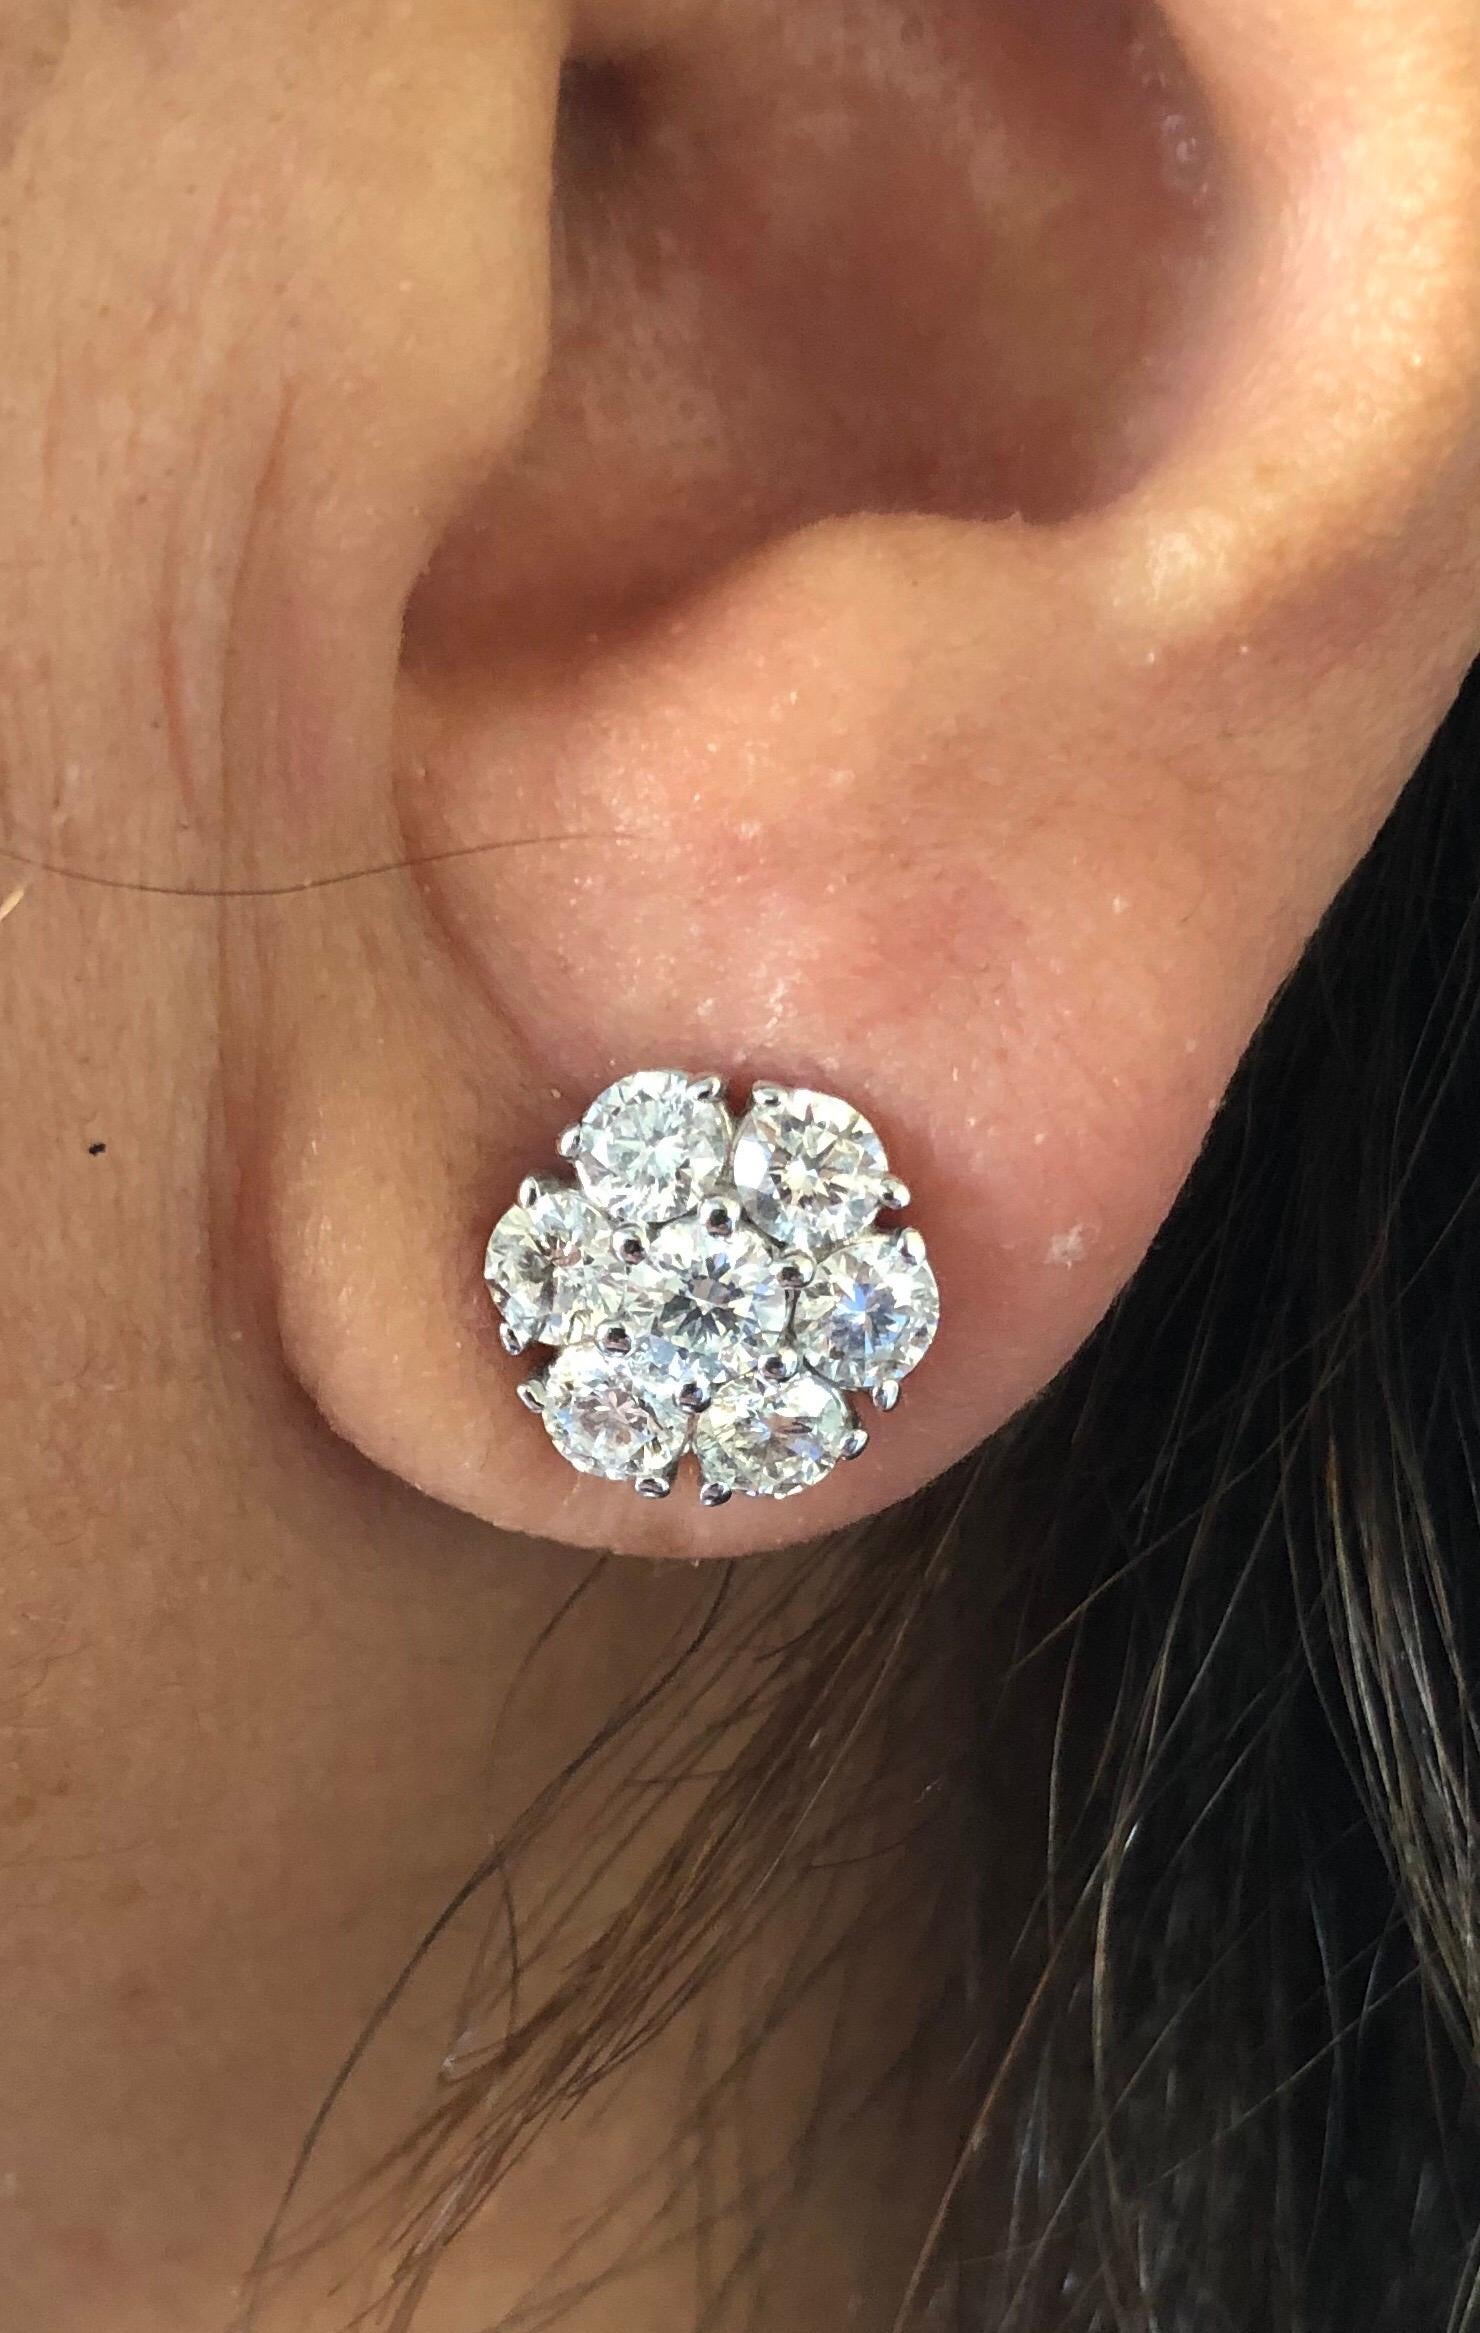 Flower cluster diamond earrings set in 14K white gold. The earrings are set with 14 diamonds each weighing 0.25 carats. The total weight of the earrings is 3.50 carats. The color of the stones are G-H, the clarity is SI. The earrings are available